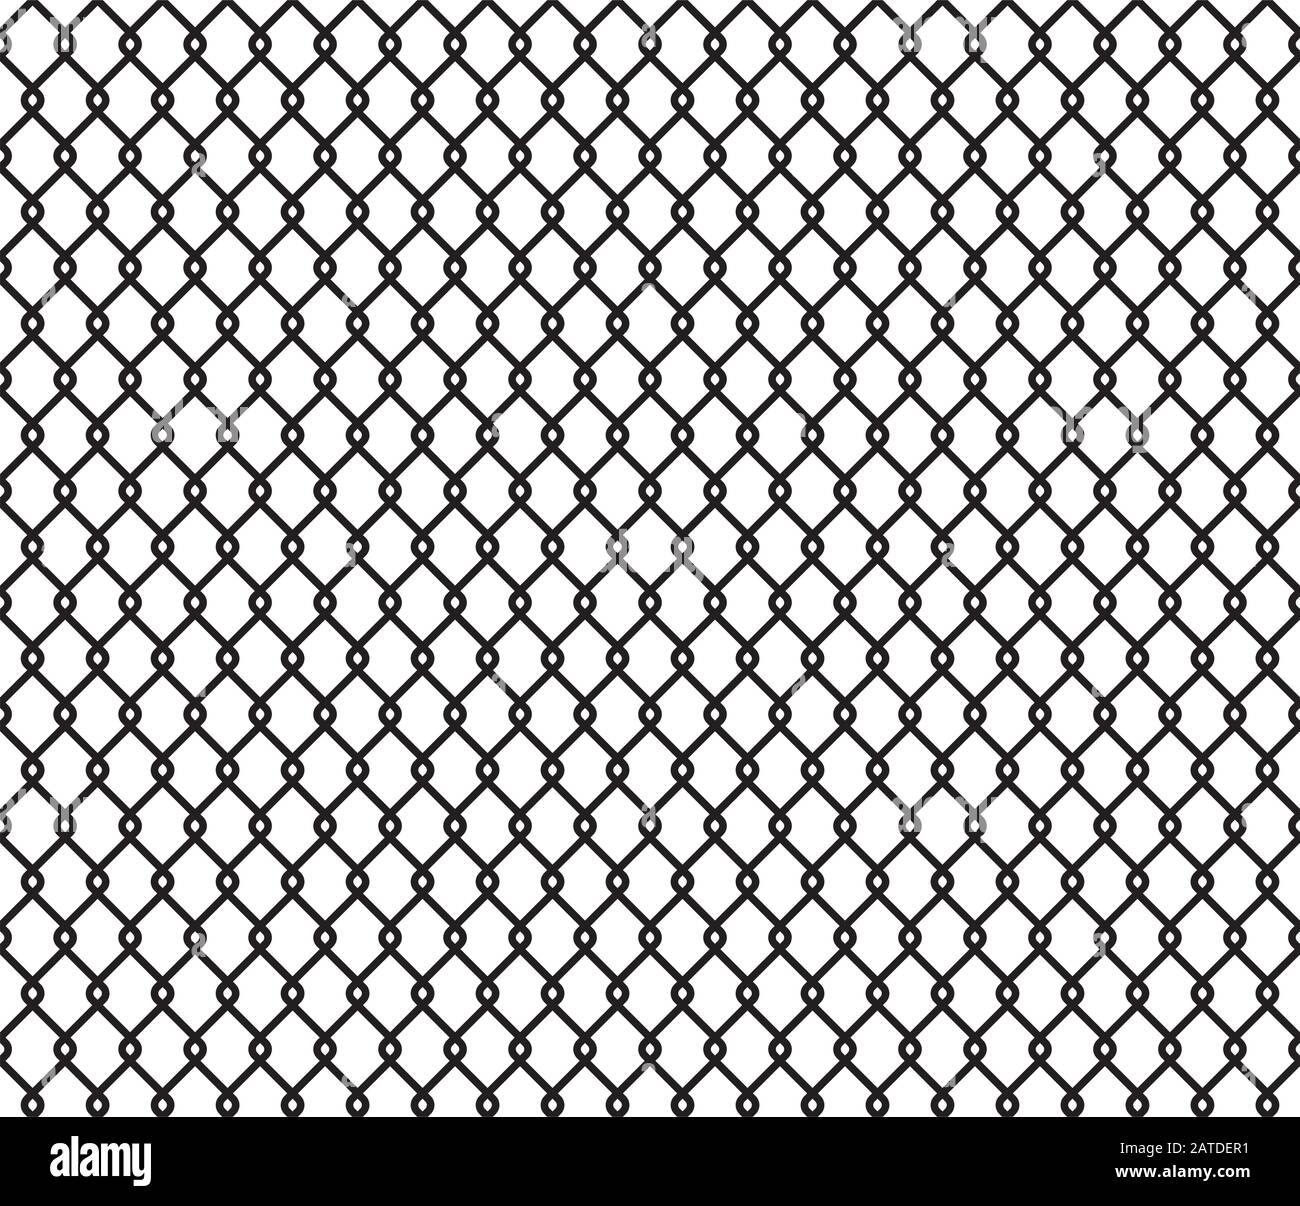 Metallic wired fence seamless pattern. Steel wire mesh isolated on